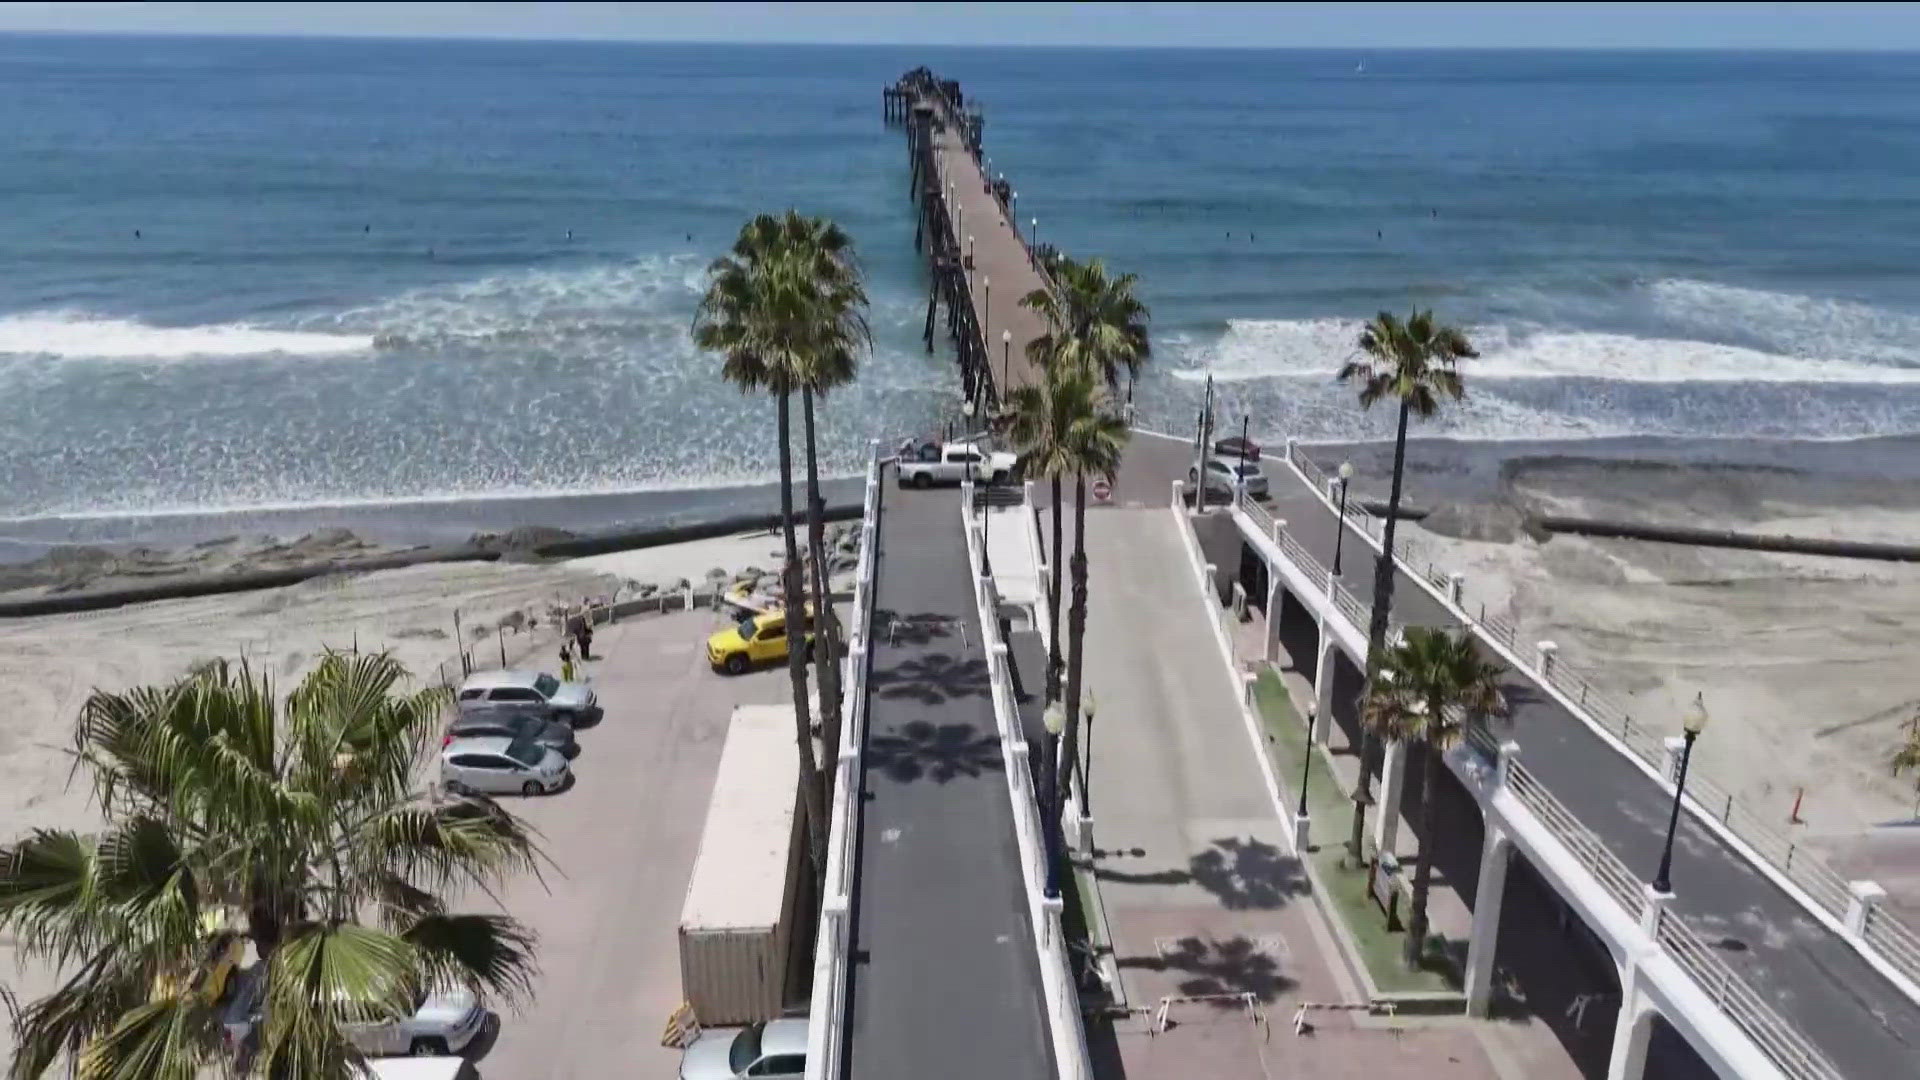 CBS 8 took a tour of the fire-damaged pier Thursday with Oceanside Mayor Esther Sanchez.